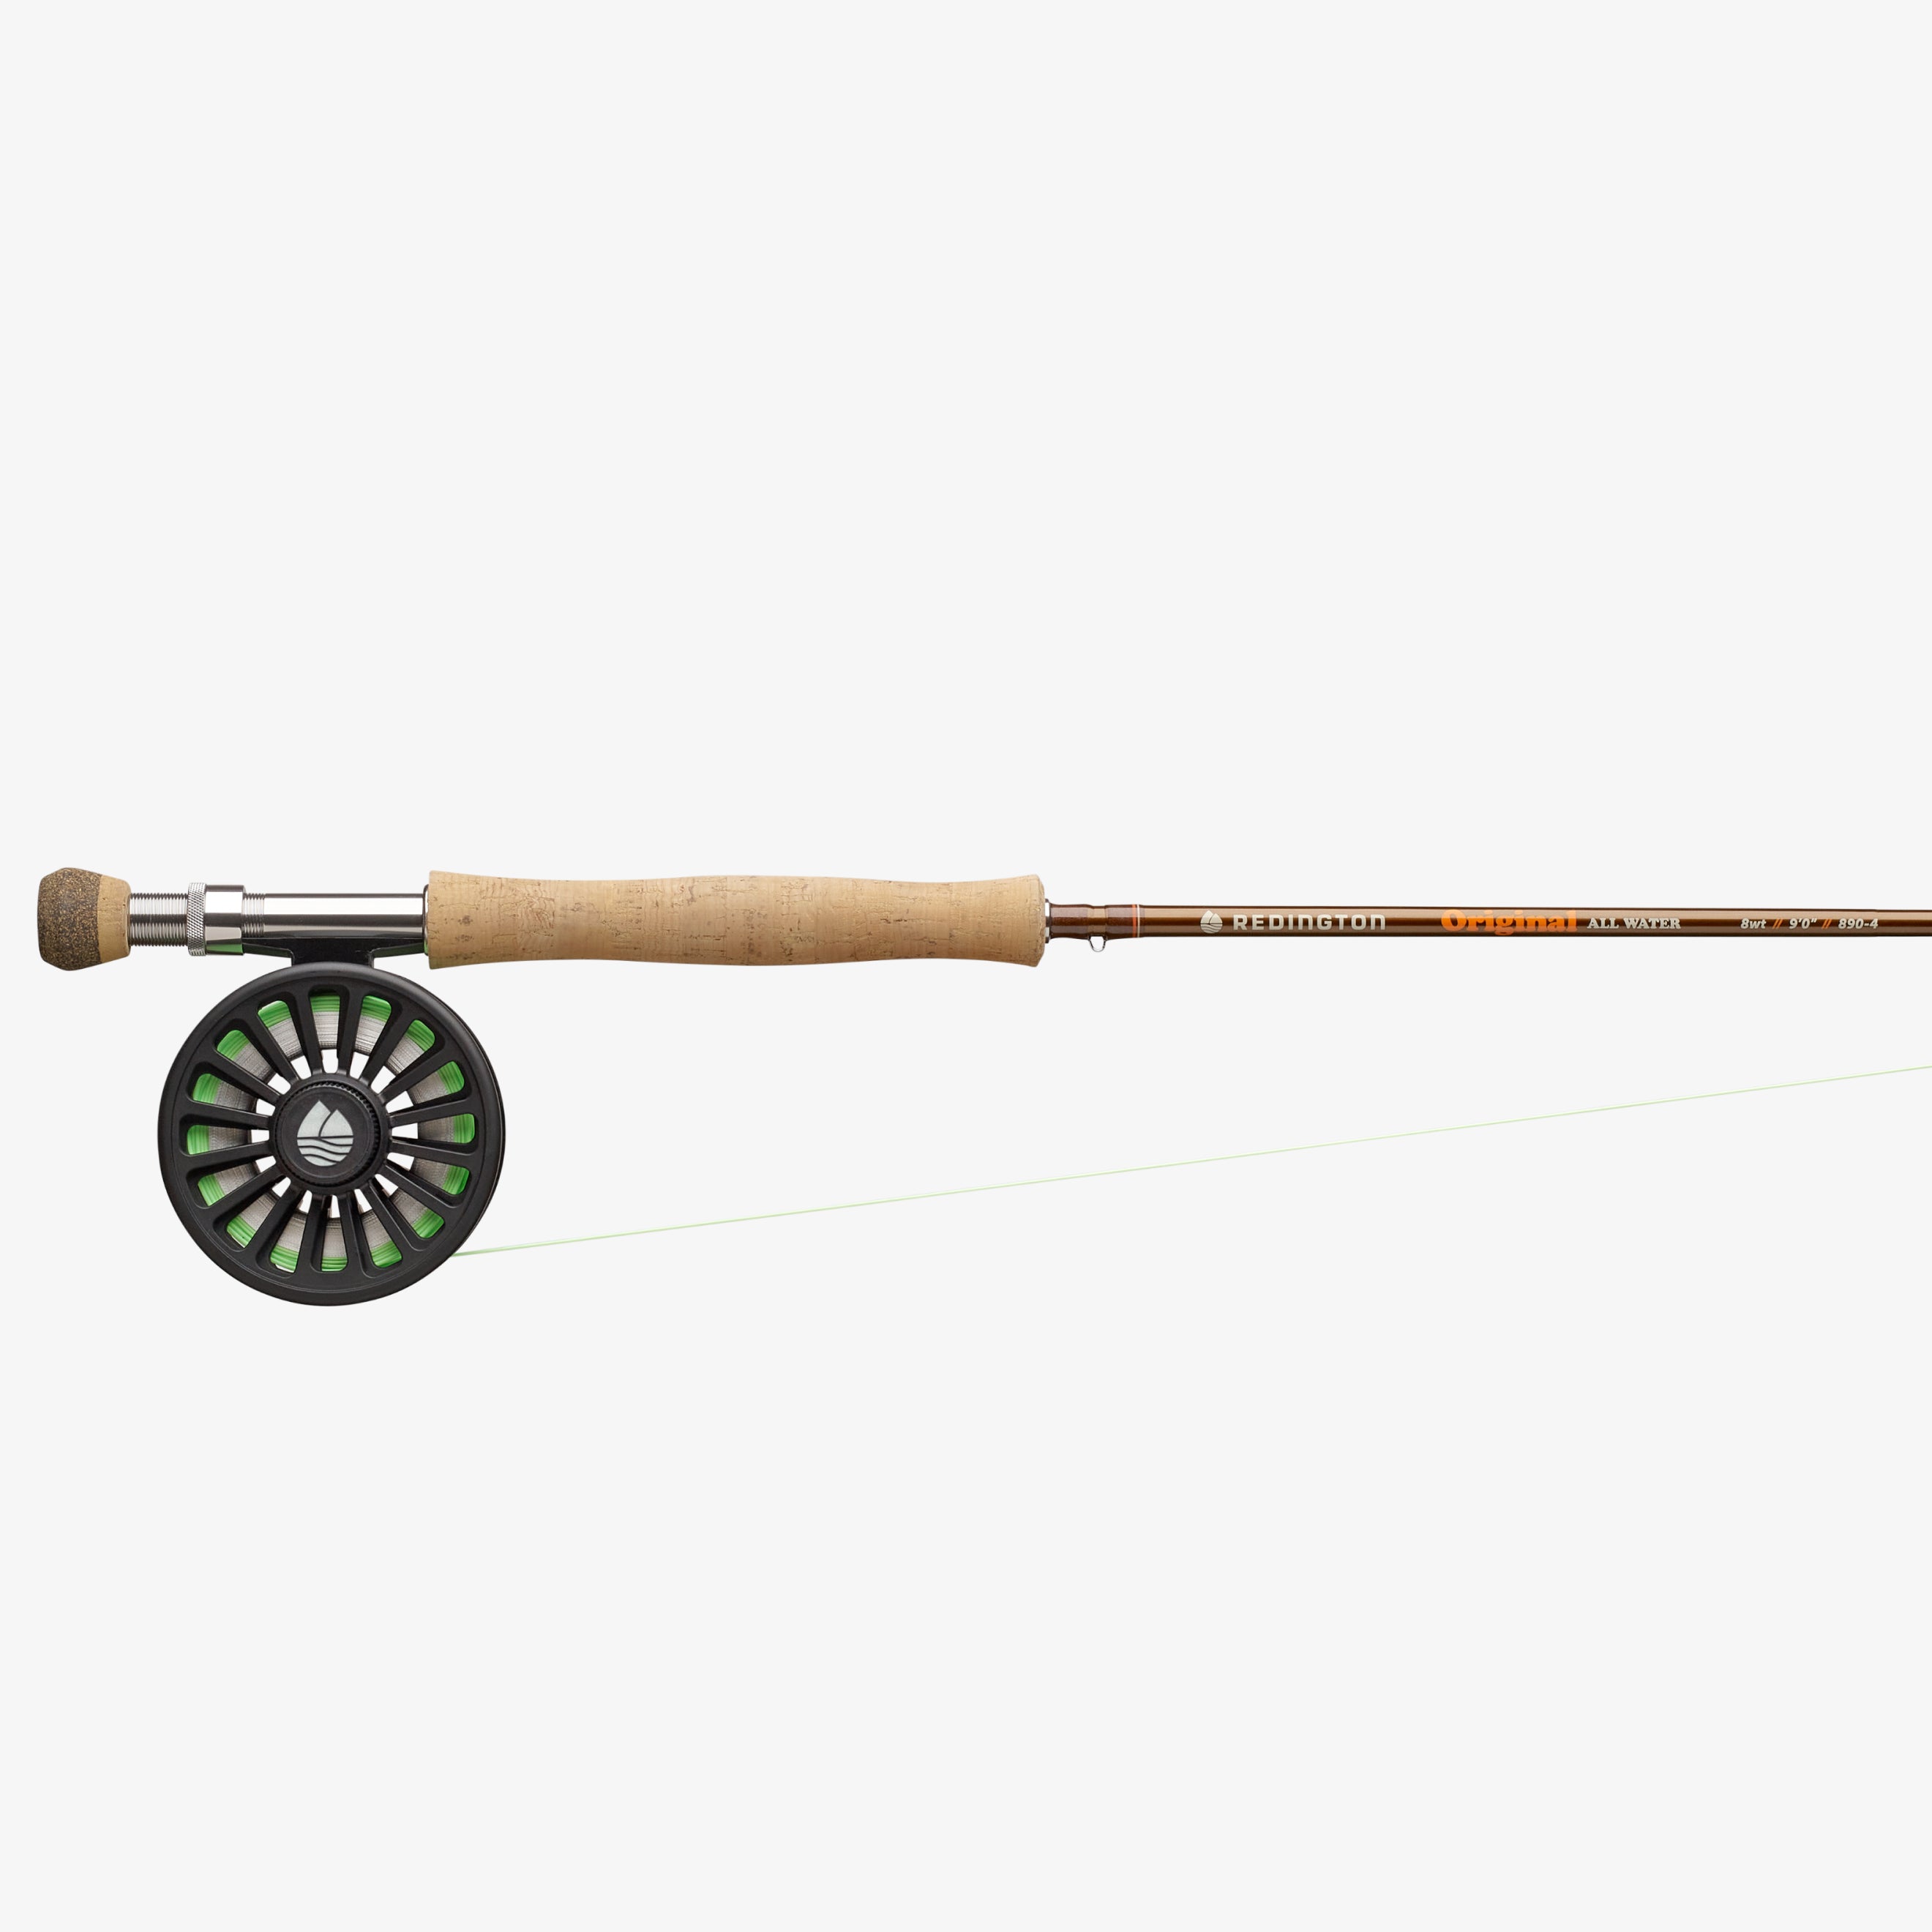 Redington Fly Fishing Combo Kit 890-4 Vice Outfit with I.D Reel 8